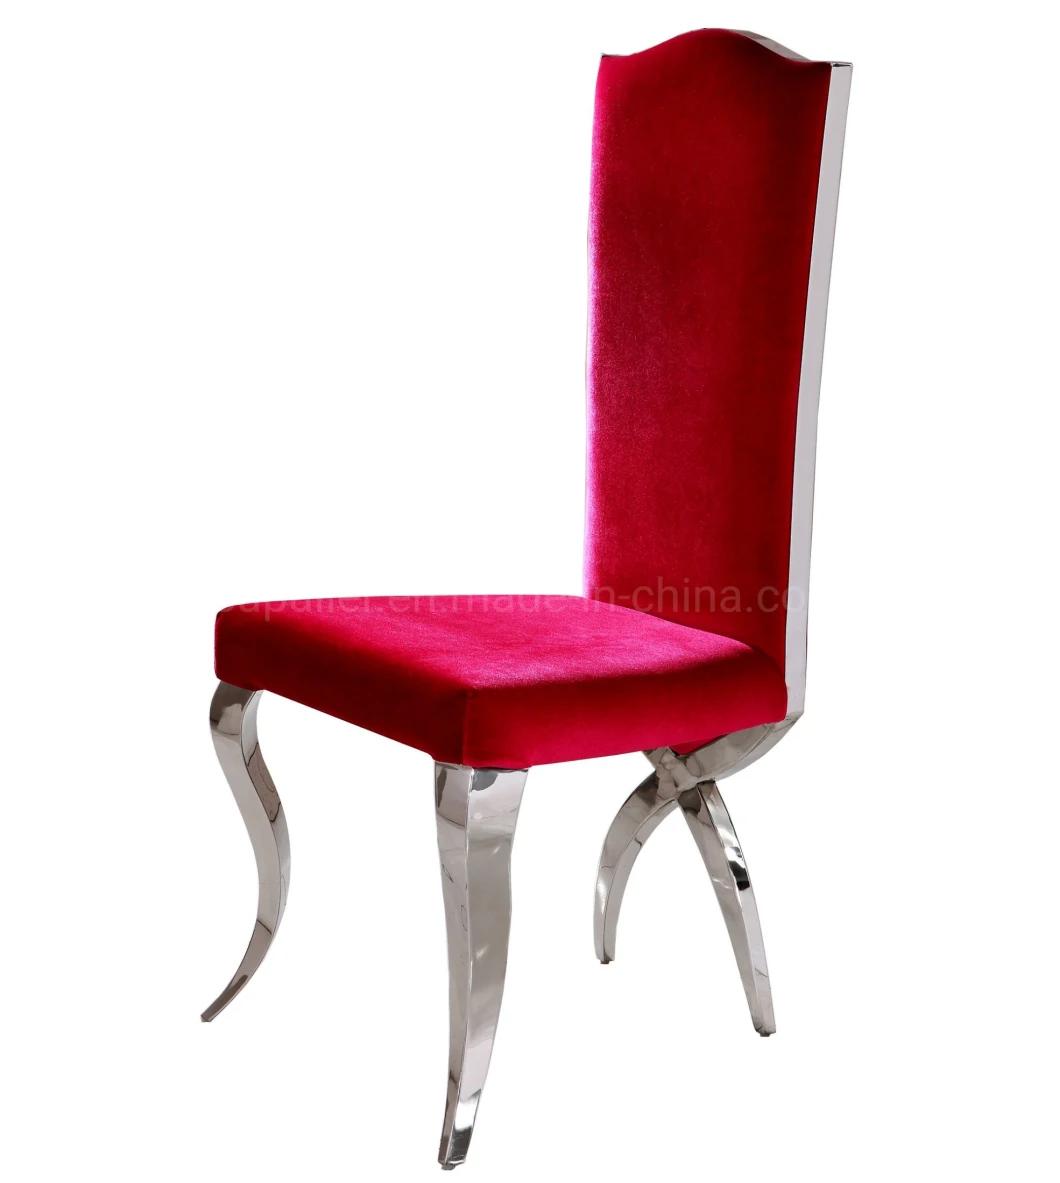 Contemporary Hot Selling Royal Red Fabric Dining Room Chairs